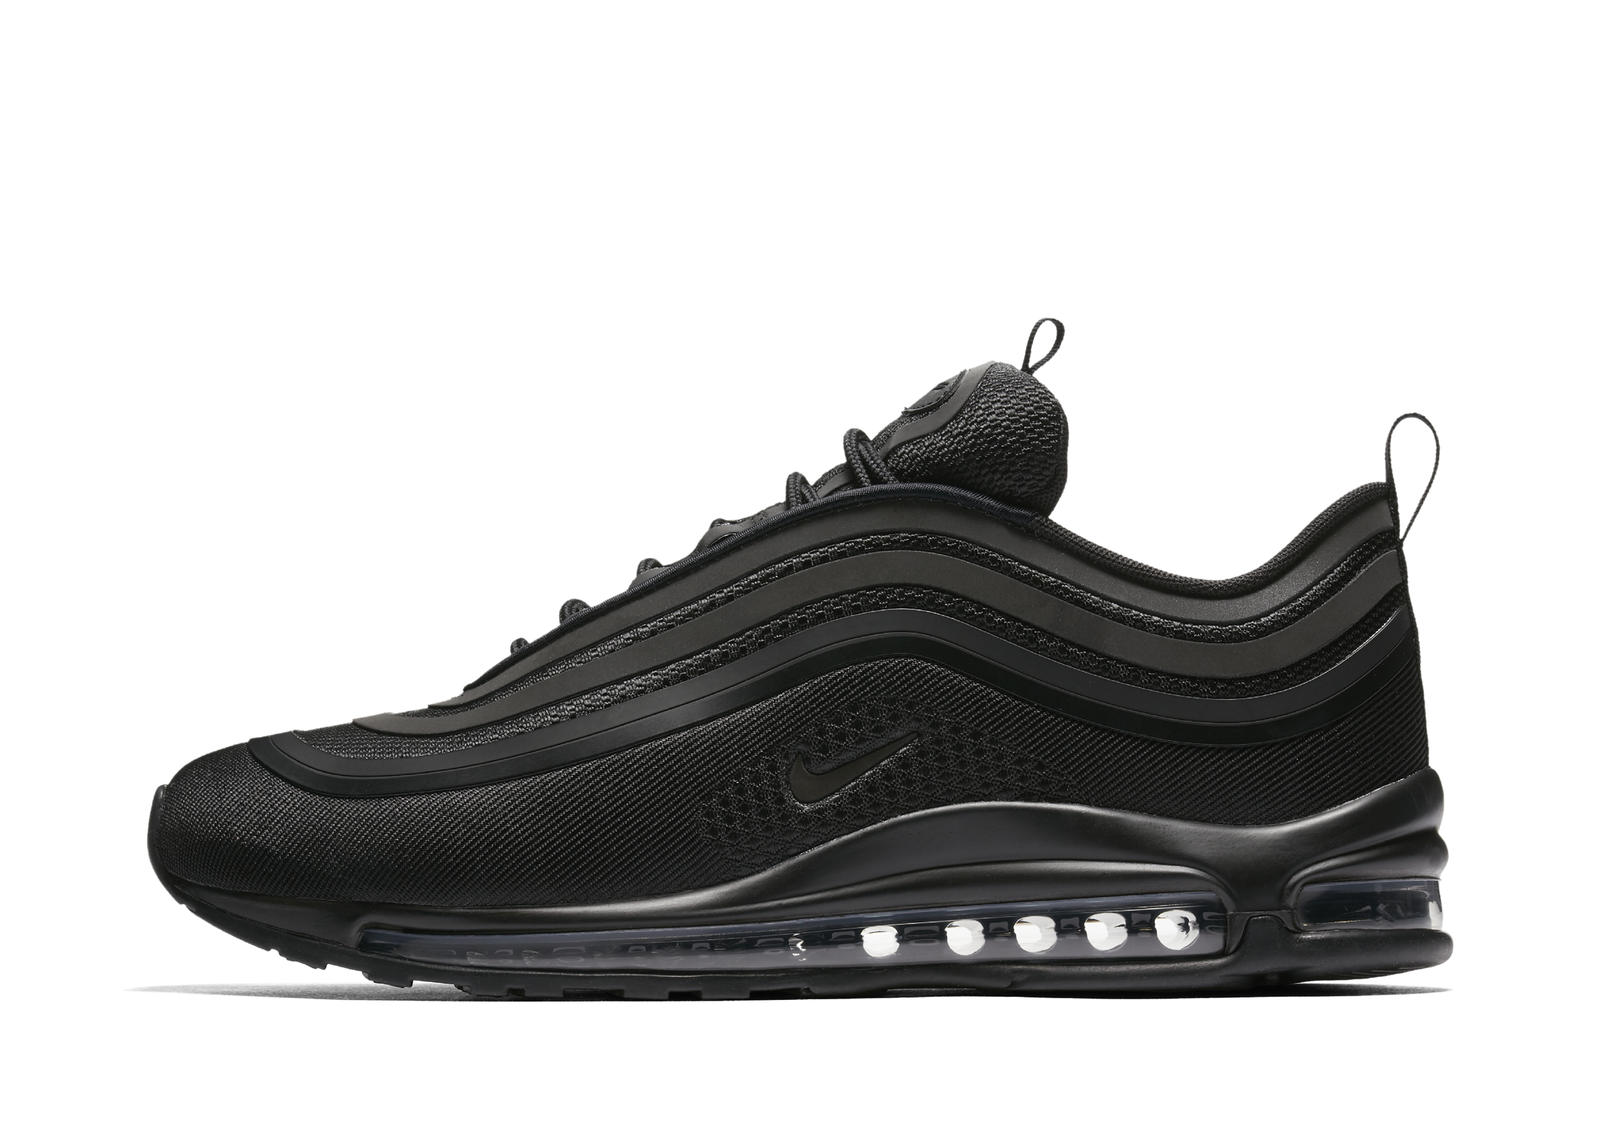 Nike Air Max 97 Release Guide for Fall 